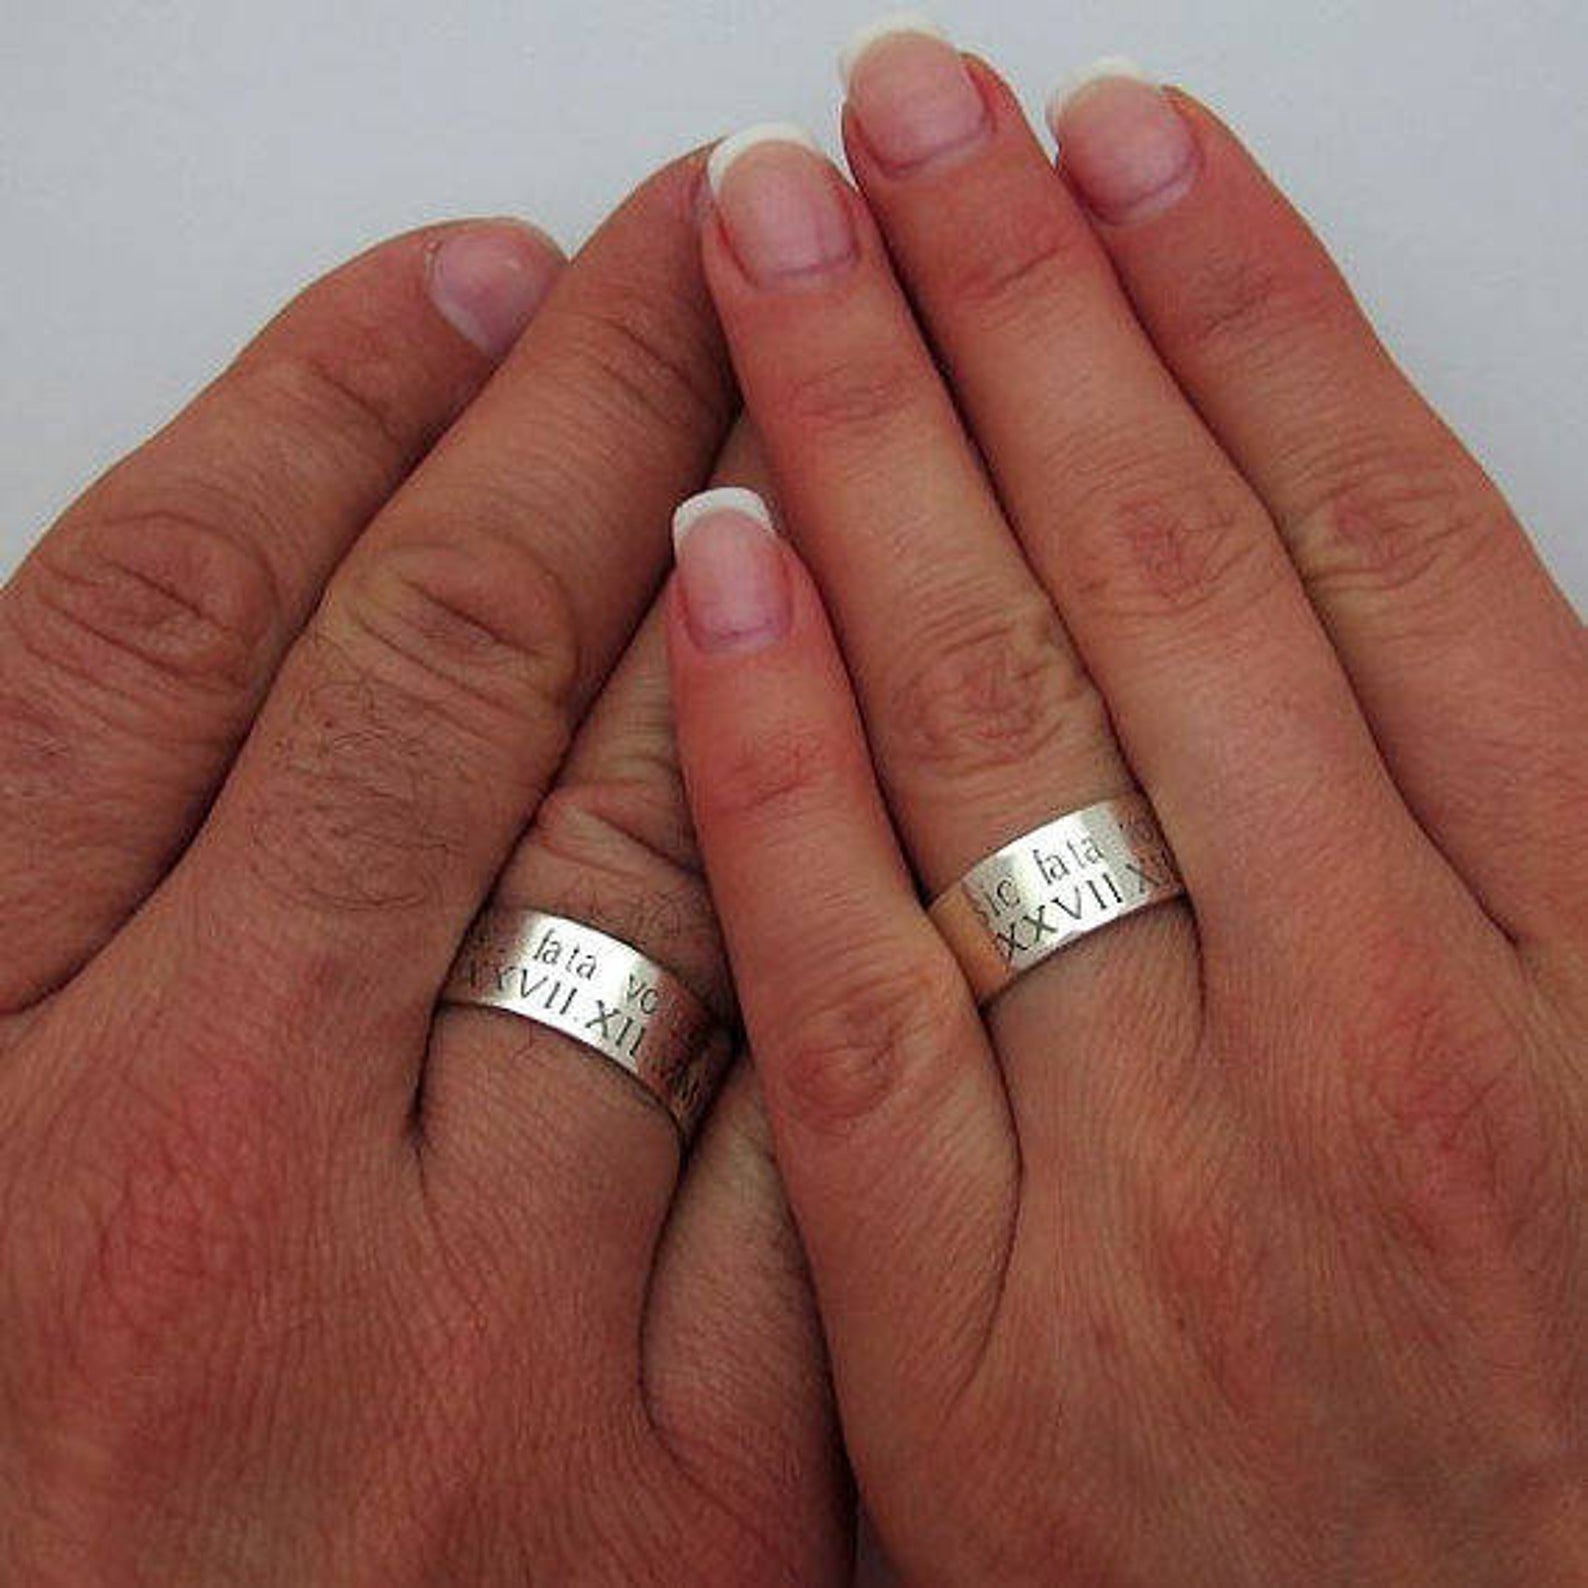 50 Gold Stainless Steel Plain Gold Couple Rings 6mm & 4mm Widths Perfect  For Weddings, Engagements, And Gifts For Lovers, Husbands, Girlfriends,  Boyfriend From Hallo713119, $18.3 | DHgate.Com